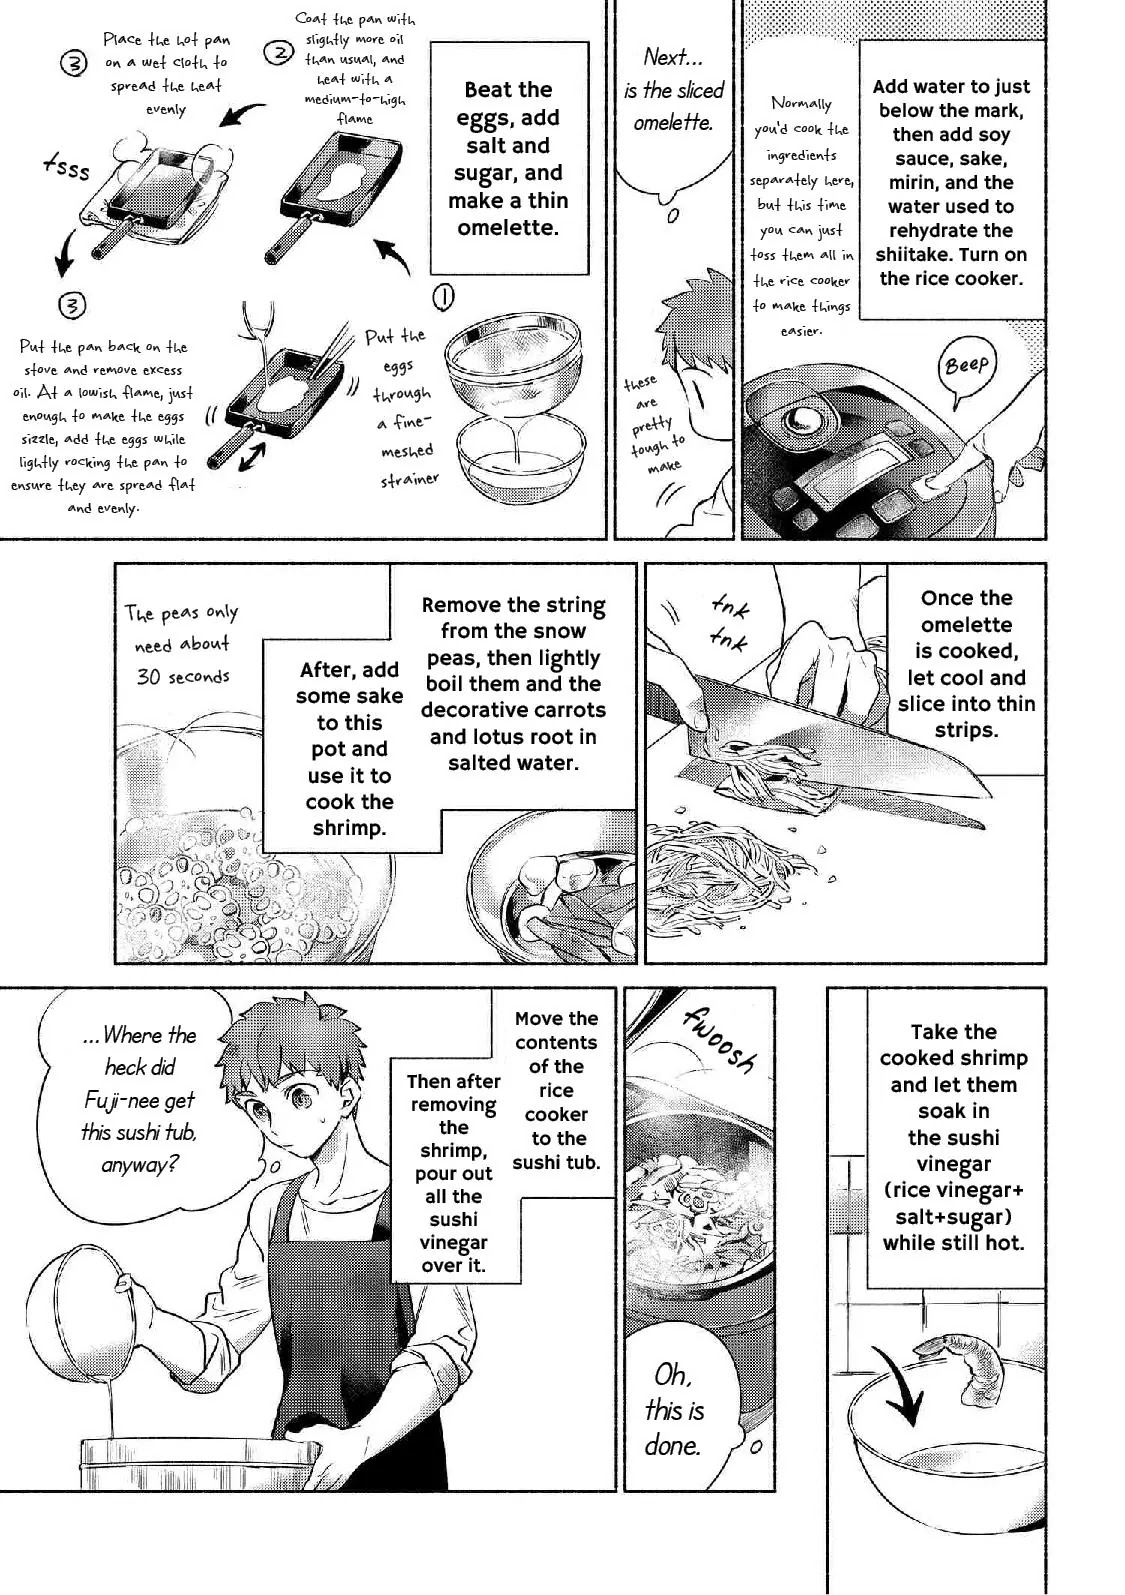 What's Cooking at the Emiya House Today? Chapter 3